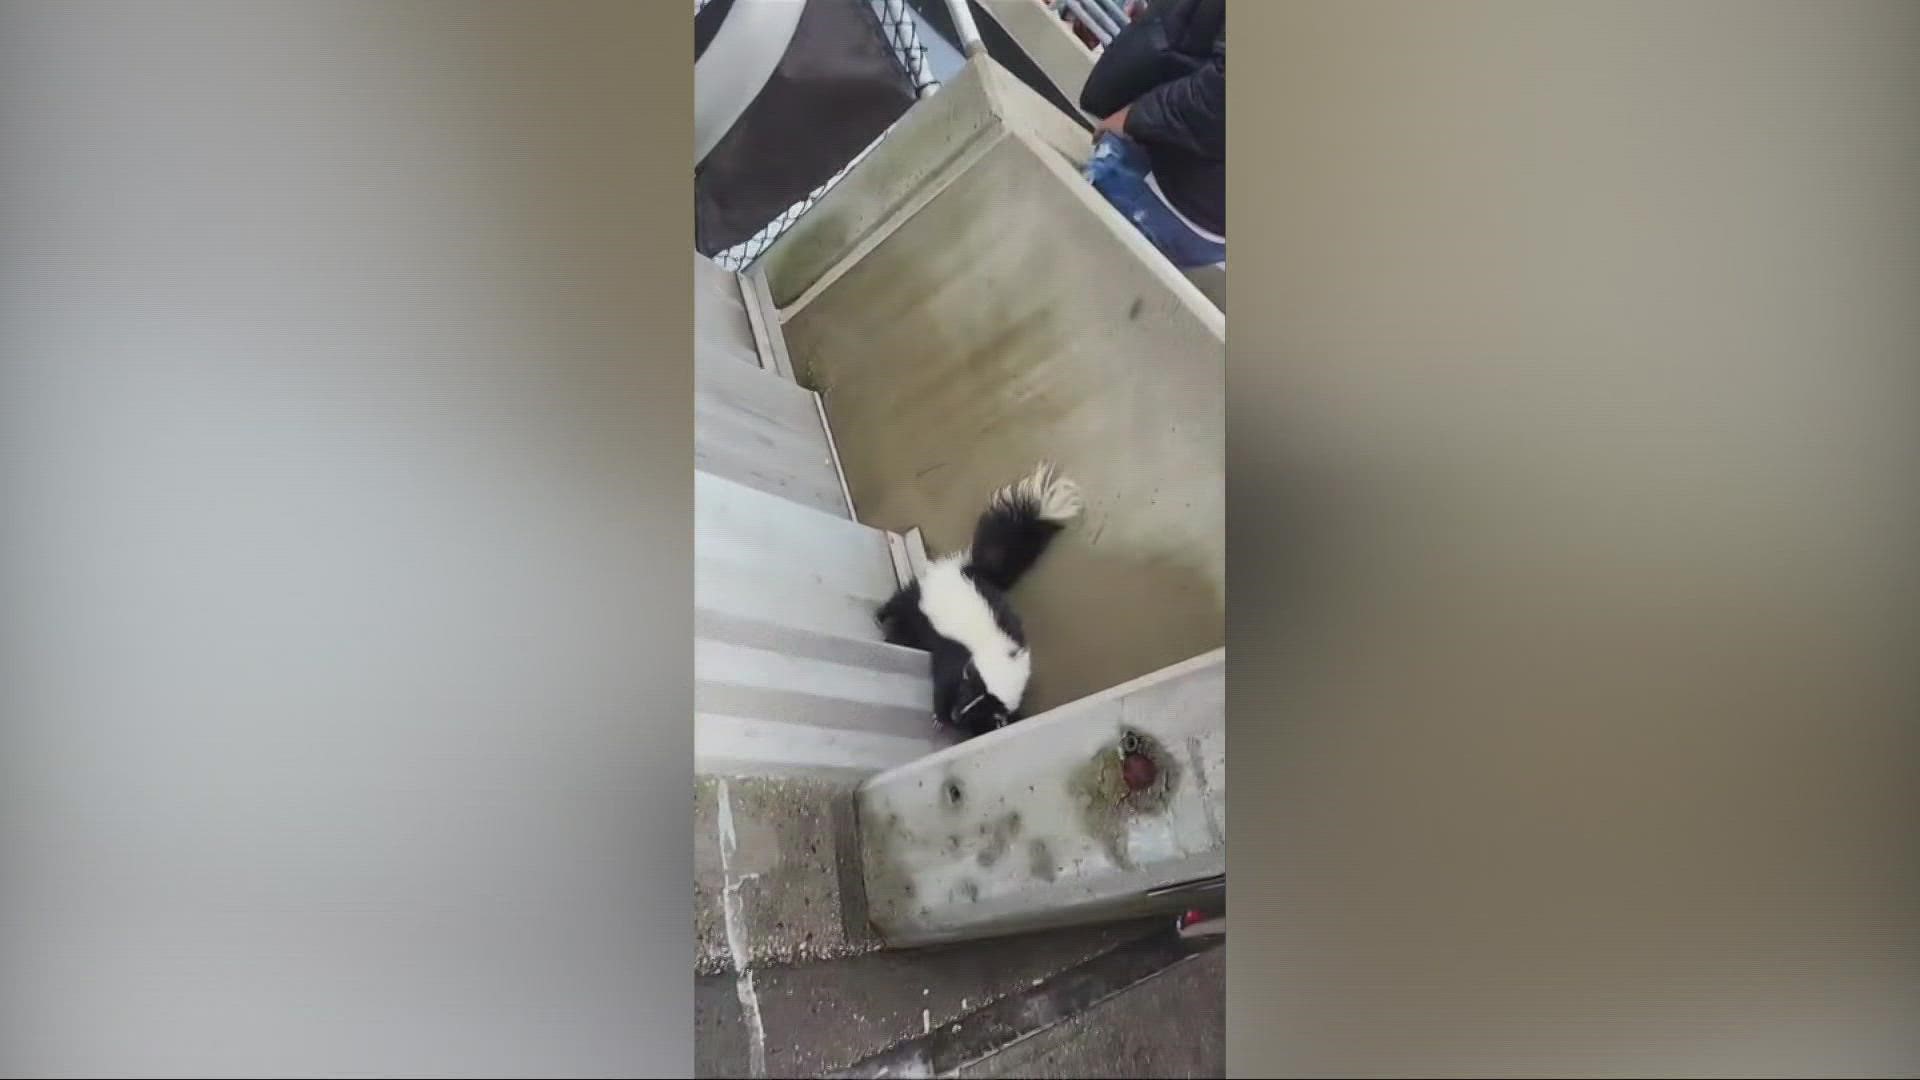 A skunk captured lots of attention across social media after it was seen at FirstEnergy Stadium as the Cleveland Browns battled the Tampa Bay Buccaneers.